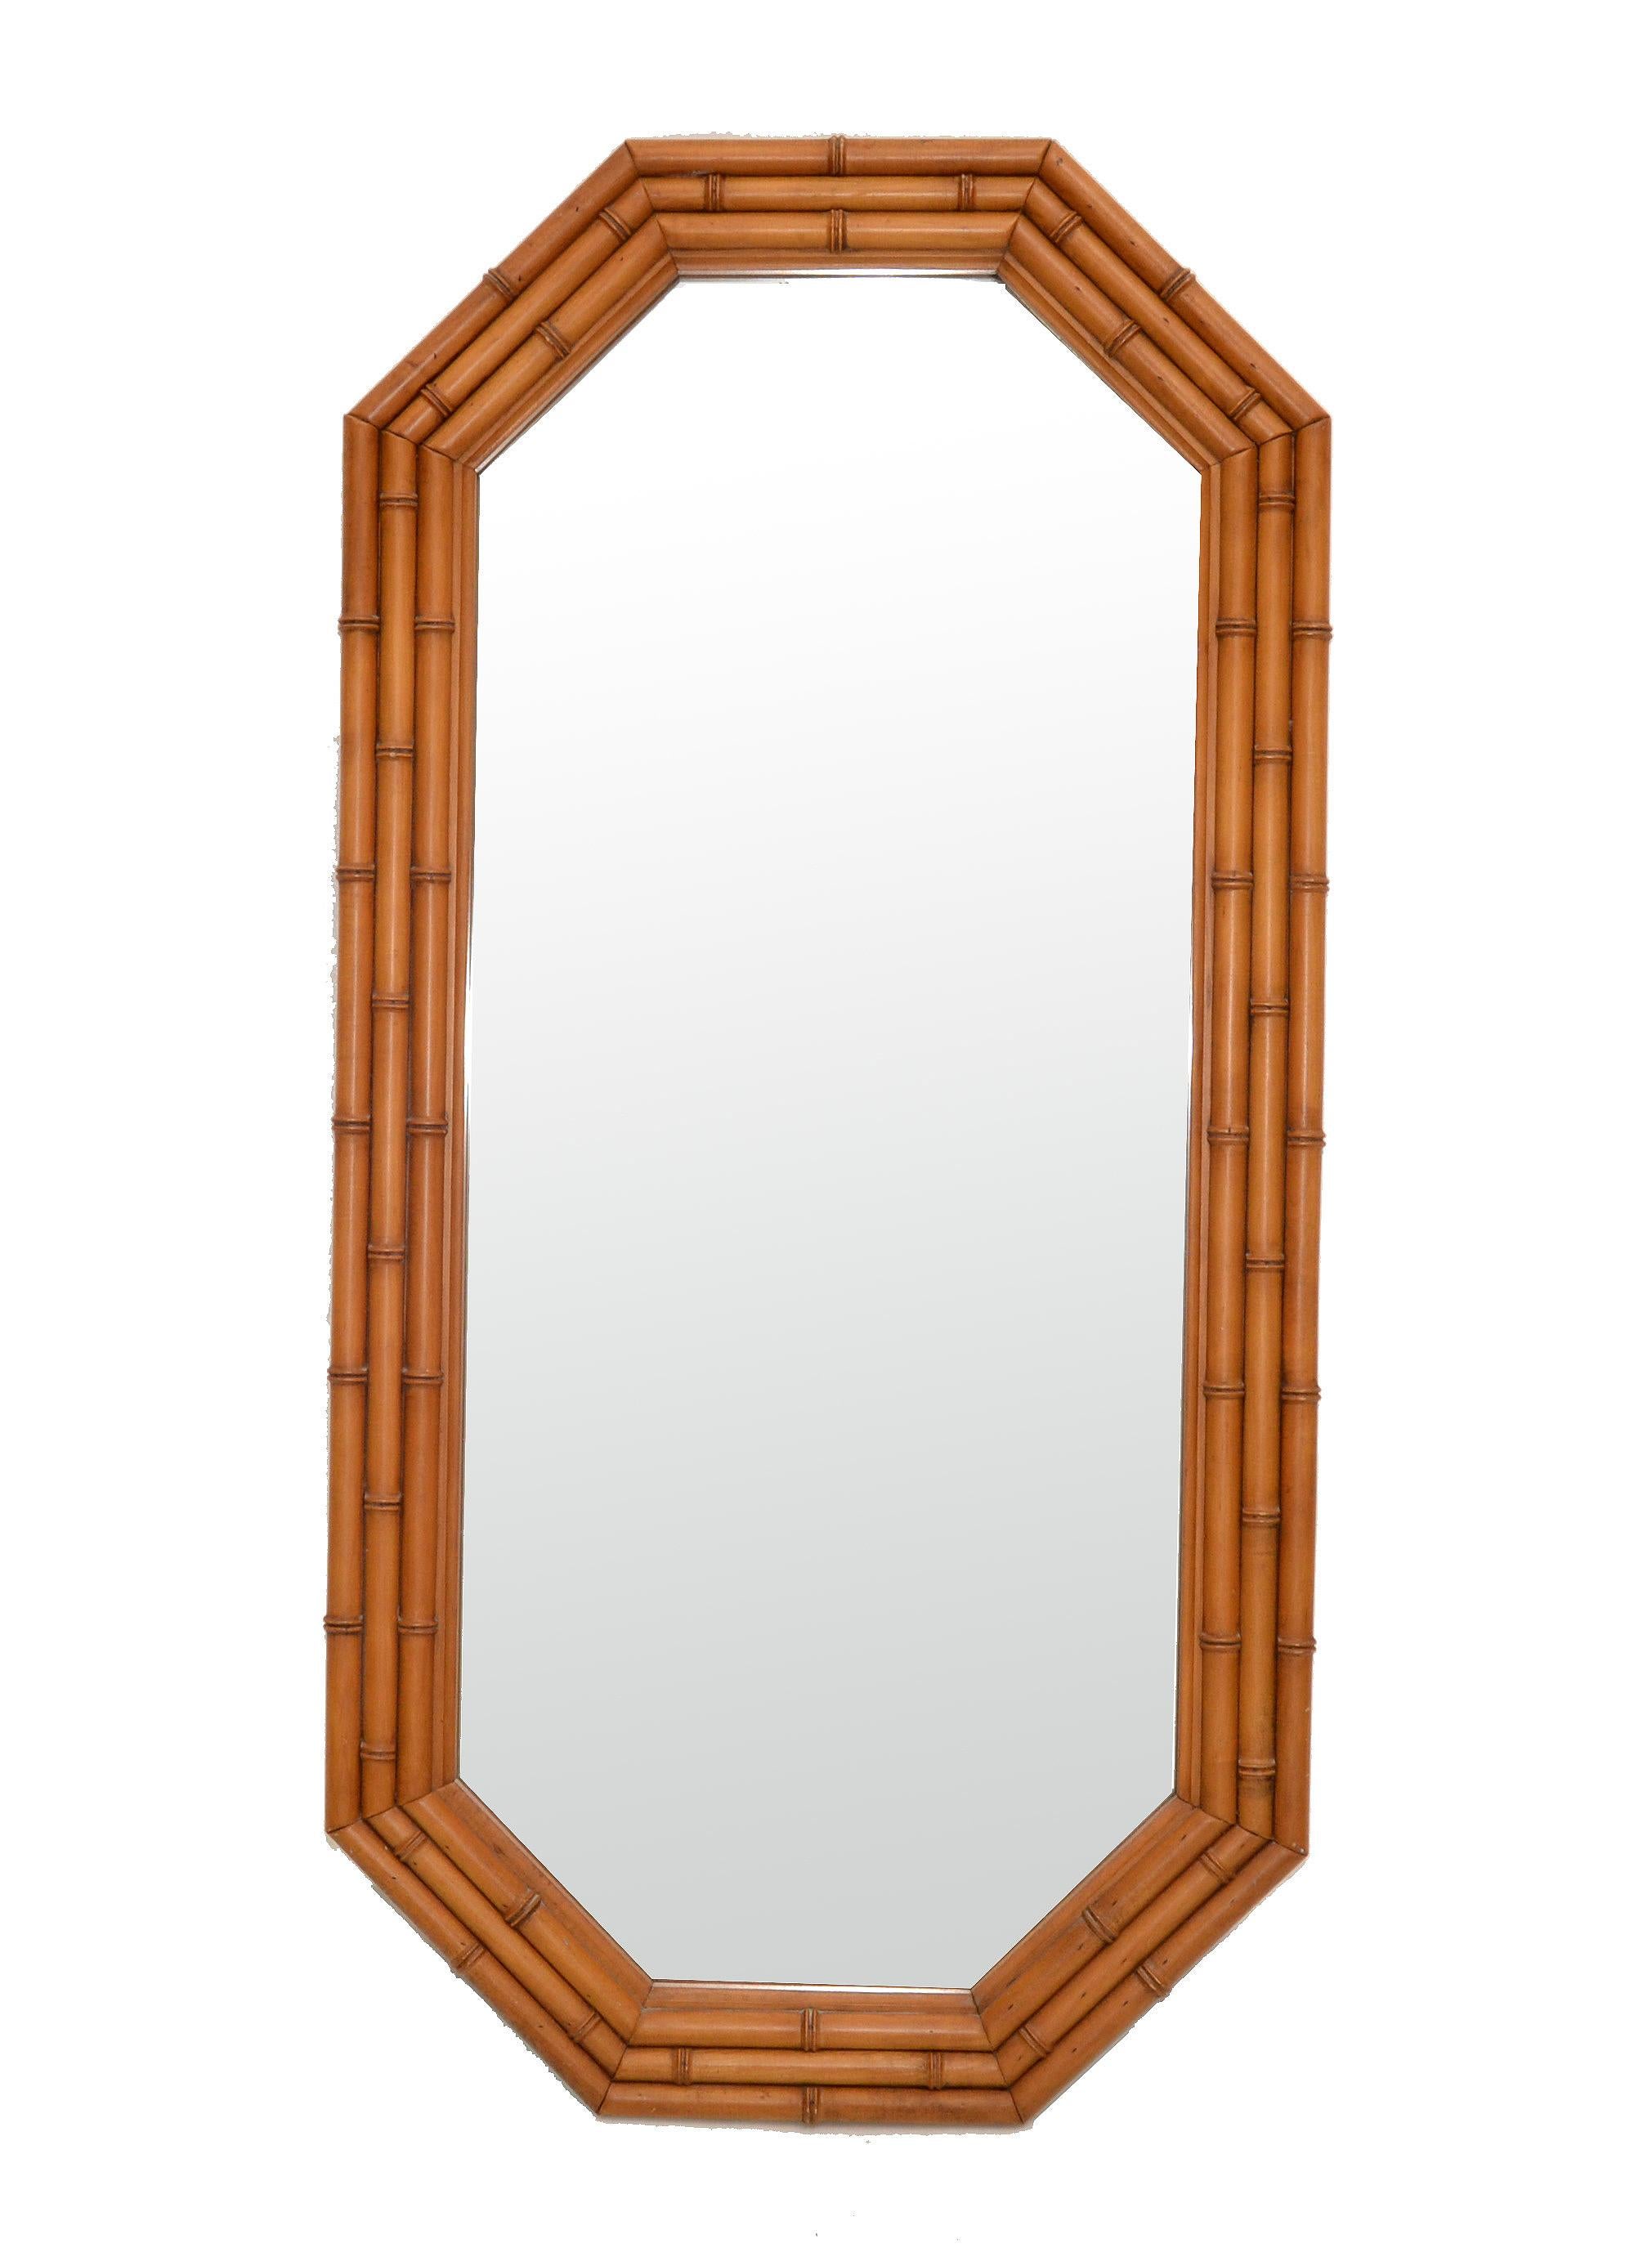 1950s Bohemian Chic octagonal wall or dresser mirror made out of bamboo. 
The mirror is heavy and is supported by a wooden backing for secure hanging.
American craftsmanship in it's best.
Mirror Size: 17 x 41.5 inches.
Can be used as single wall